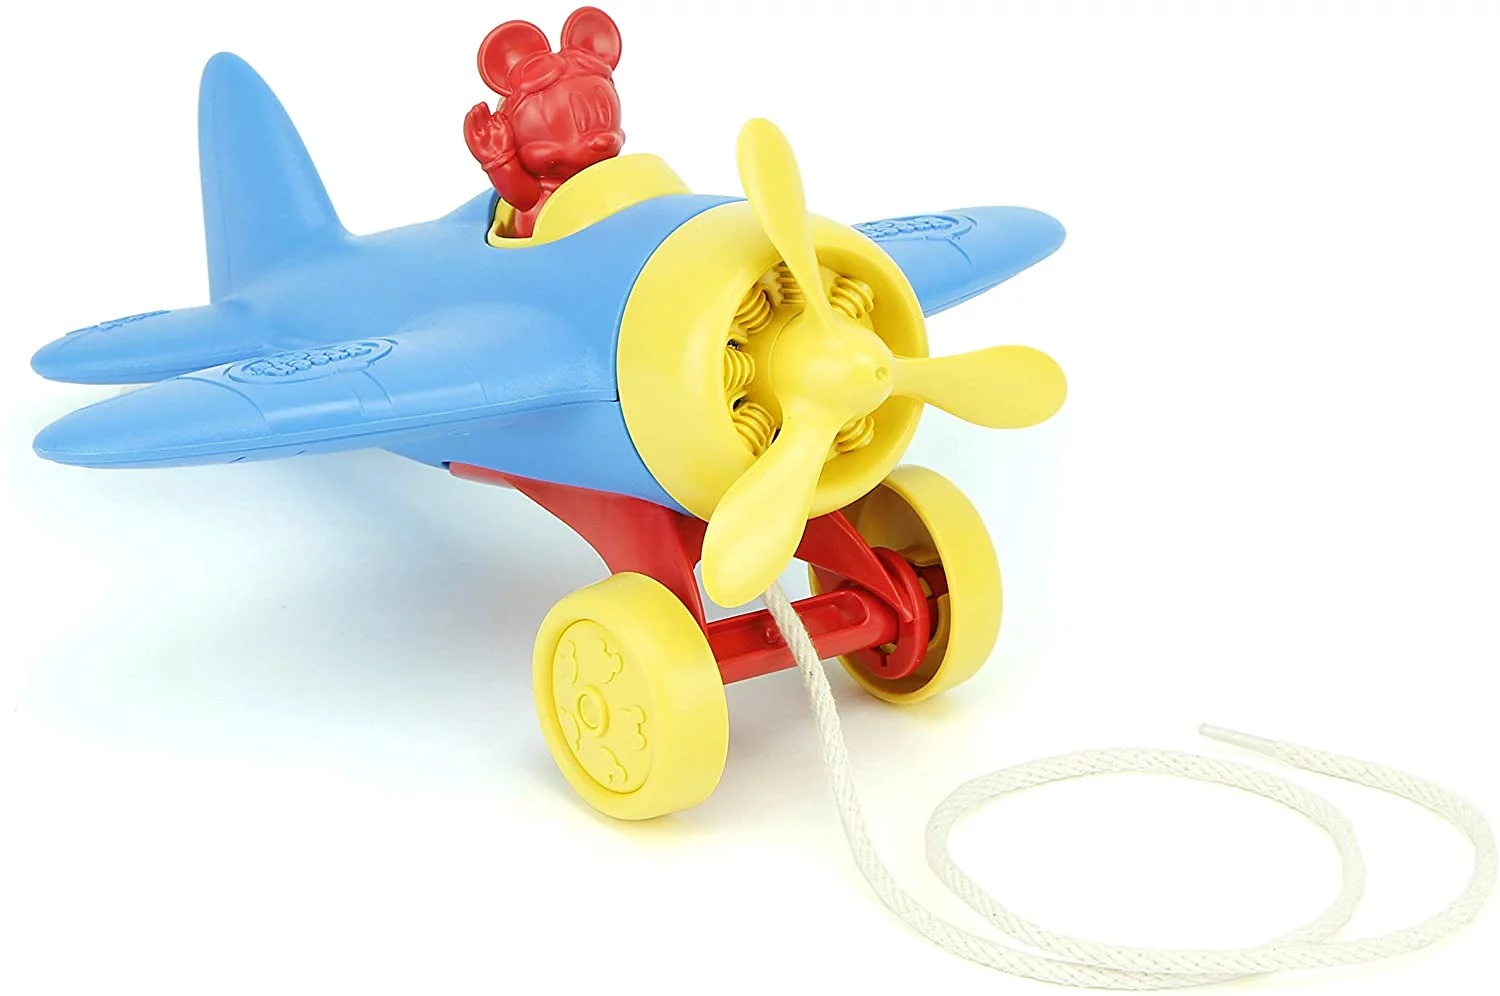 Green Toys Disney Baby Mickey Mouse Airplane Pull Toy, Unisex for 6m+ Toddlers